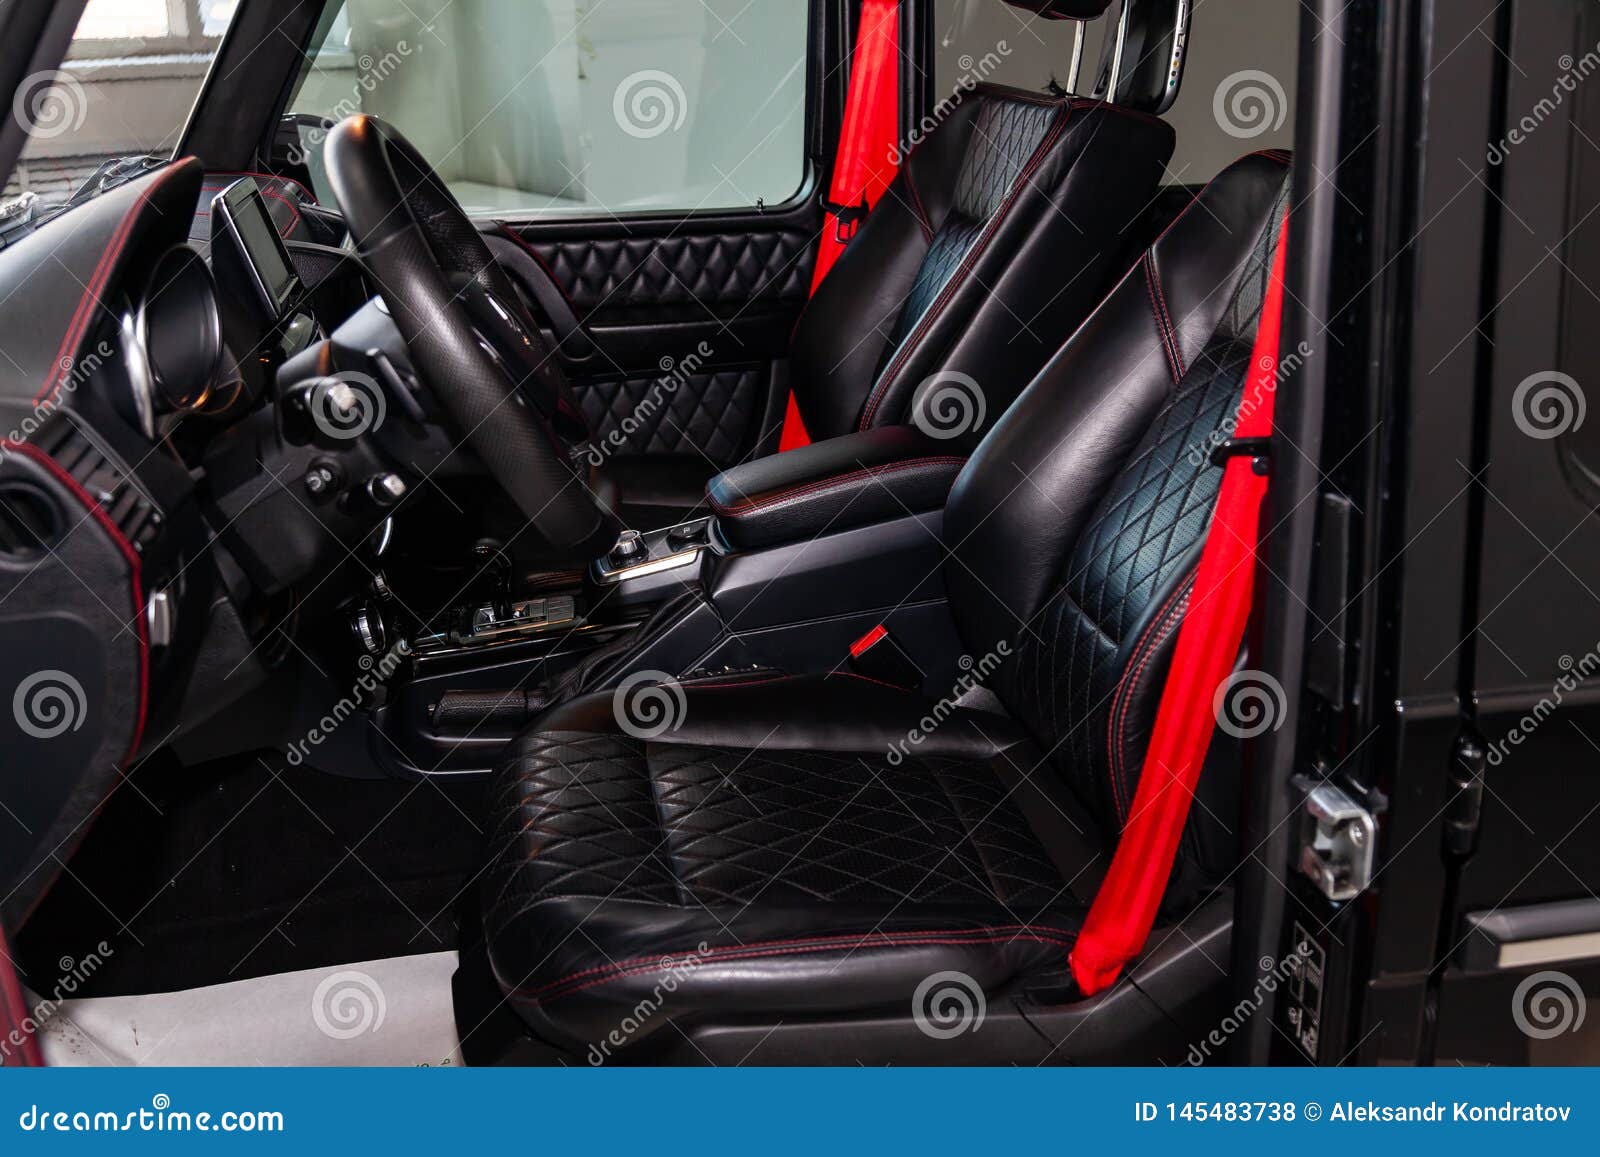 The Interior Of The Car Mercedes Benz G Class G350 With A View Of The Steering Wheel Dashboard Seats And Multimedia System With Editorial Stock Photo Image Of Design Lock